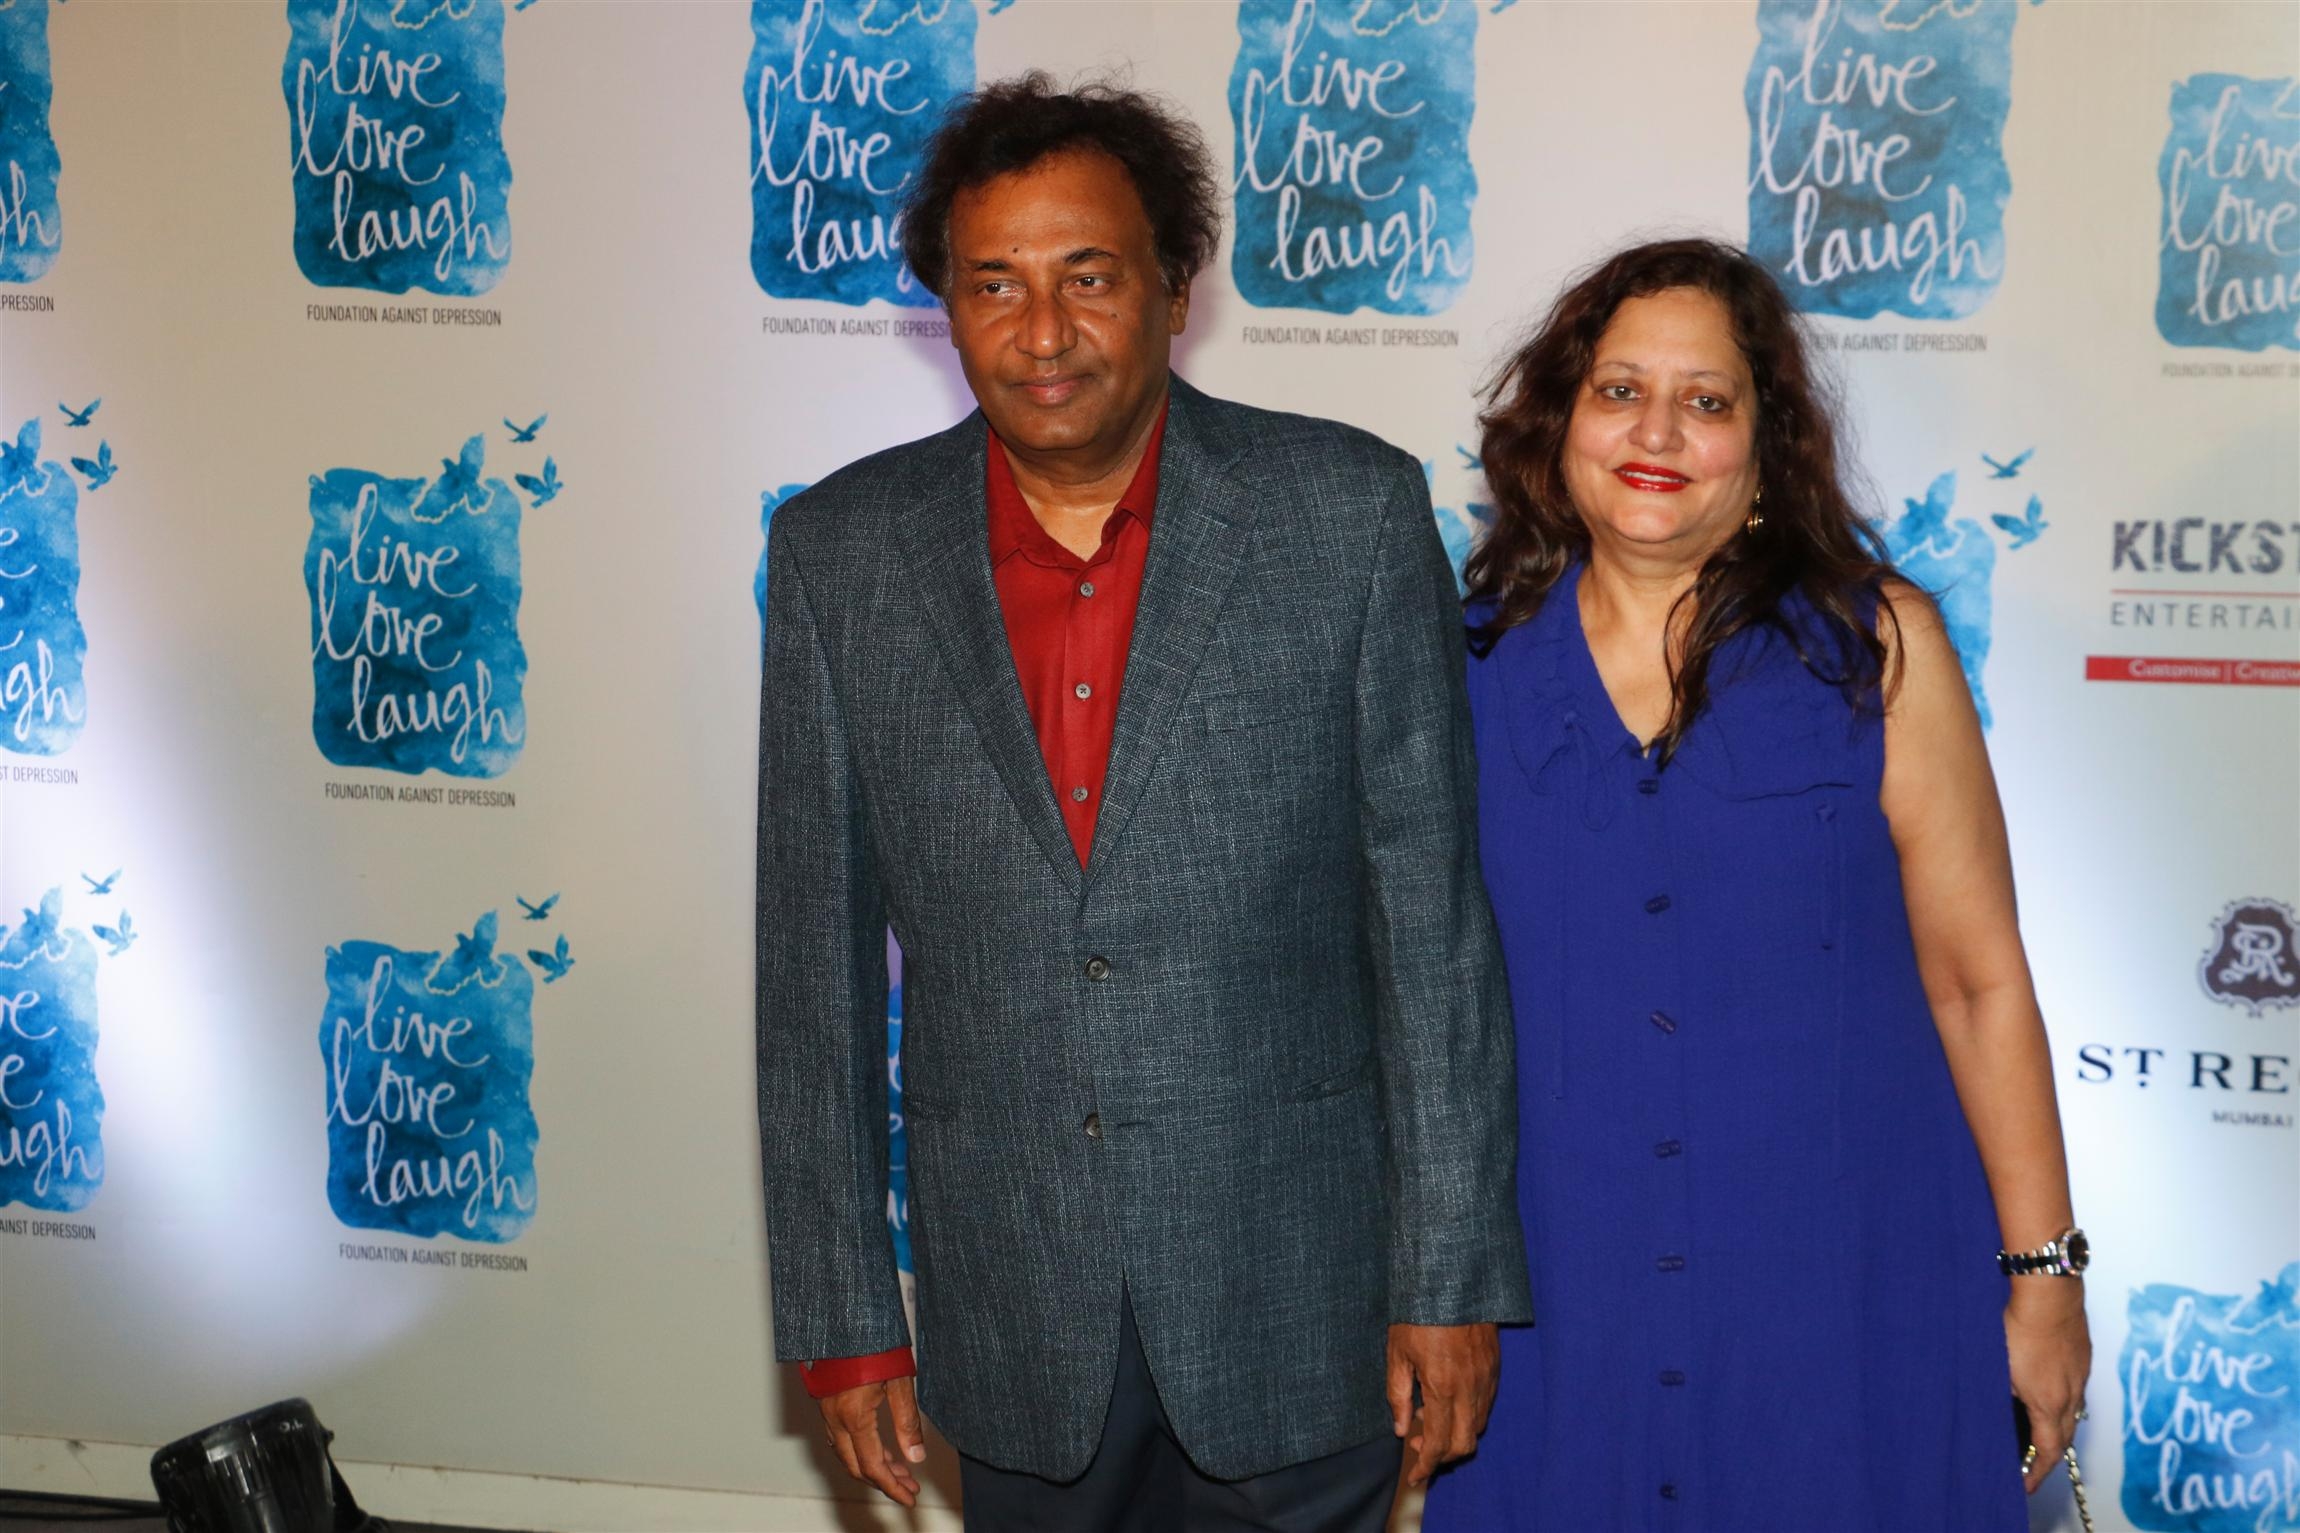 Industrialist Ajay Piramal along with his wife Swati Piramal during the launch of Deepika Padukone's NGO The Live Love Laugh Foundation in Mumbai